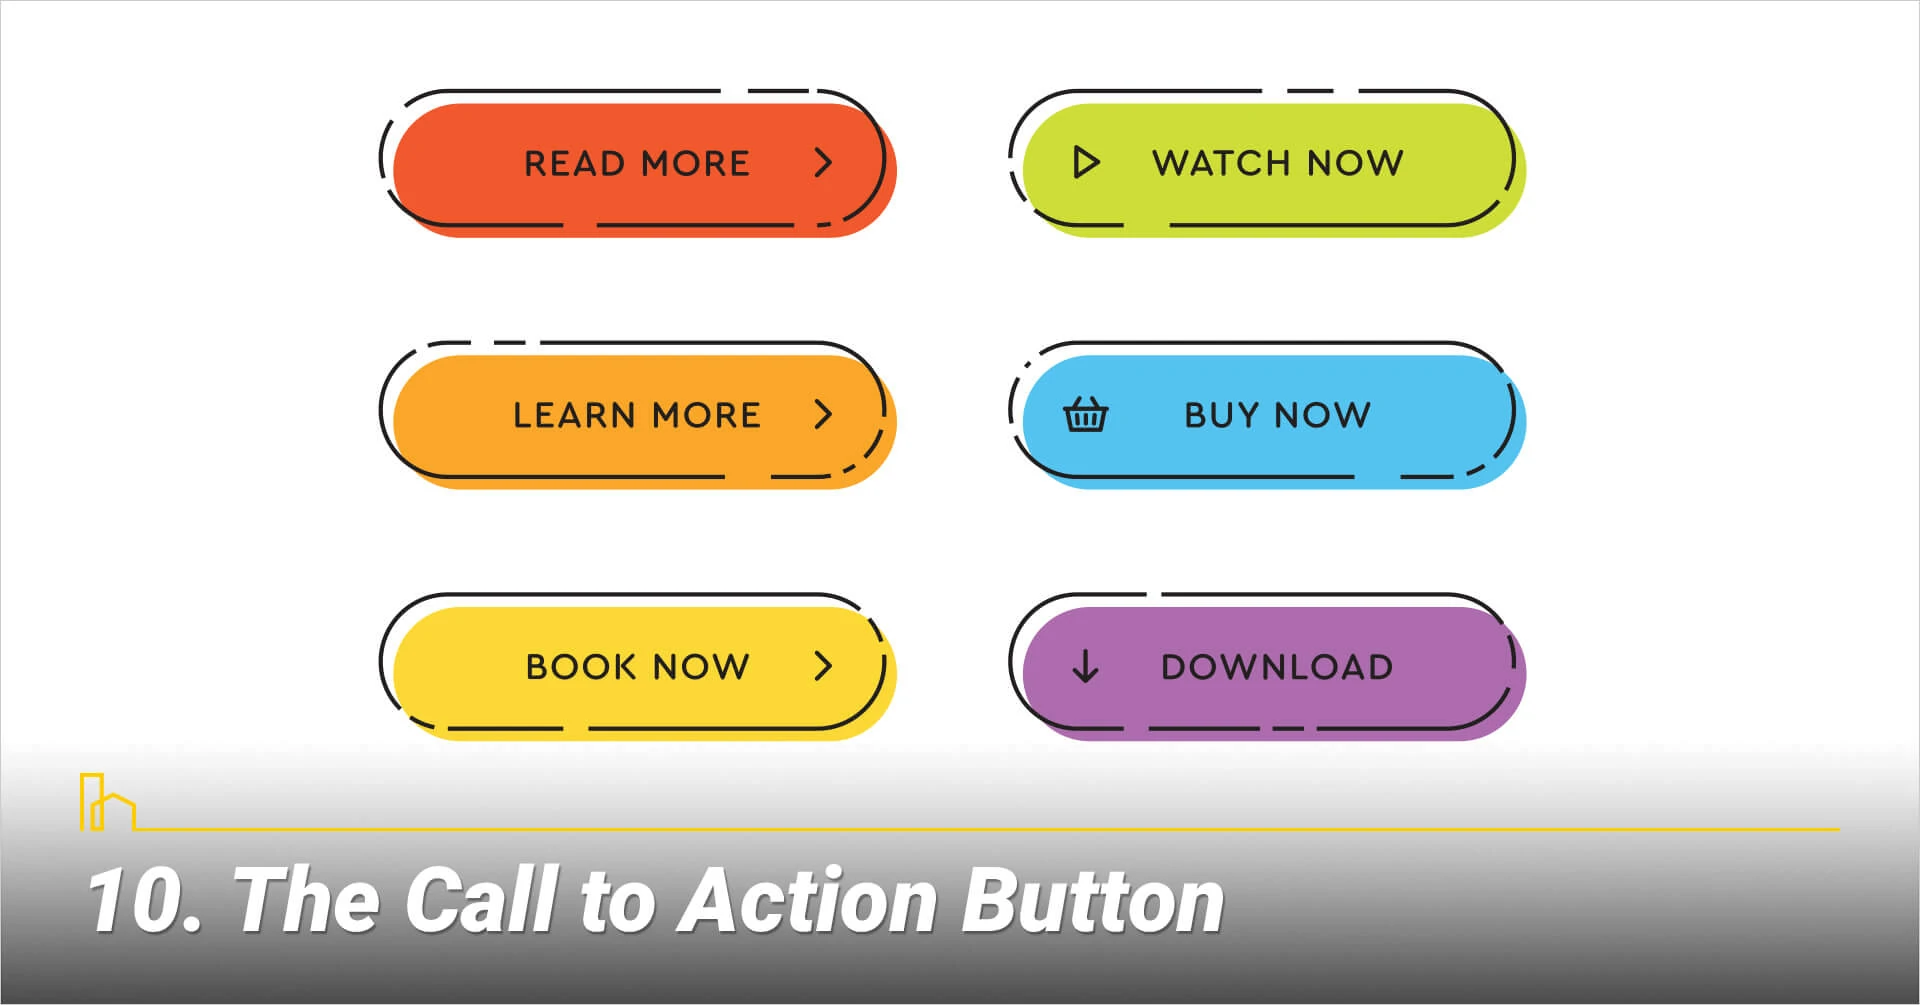 The Call to Action Button, encourage readers to take action